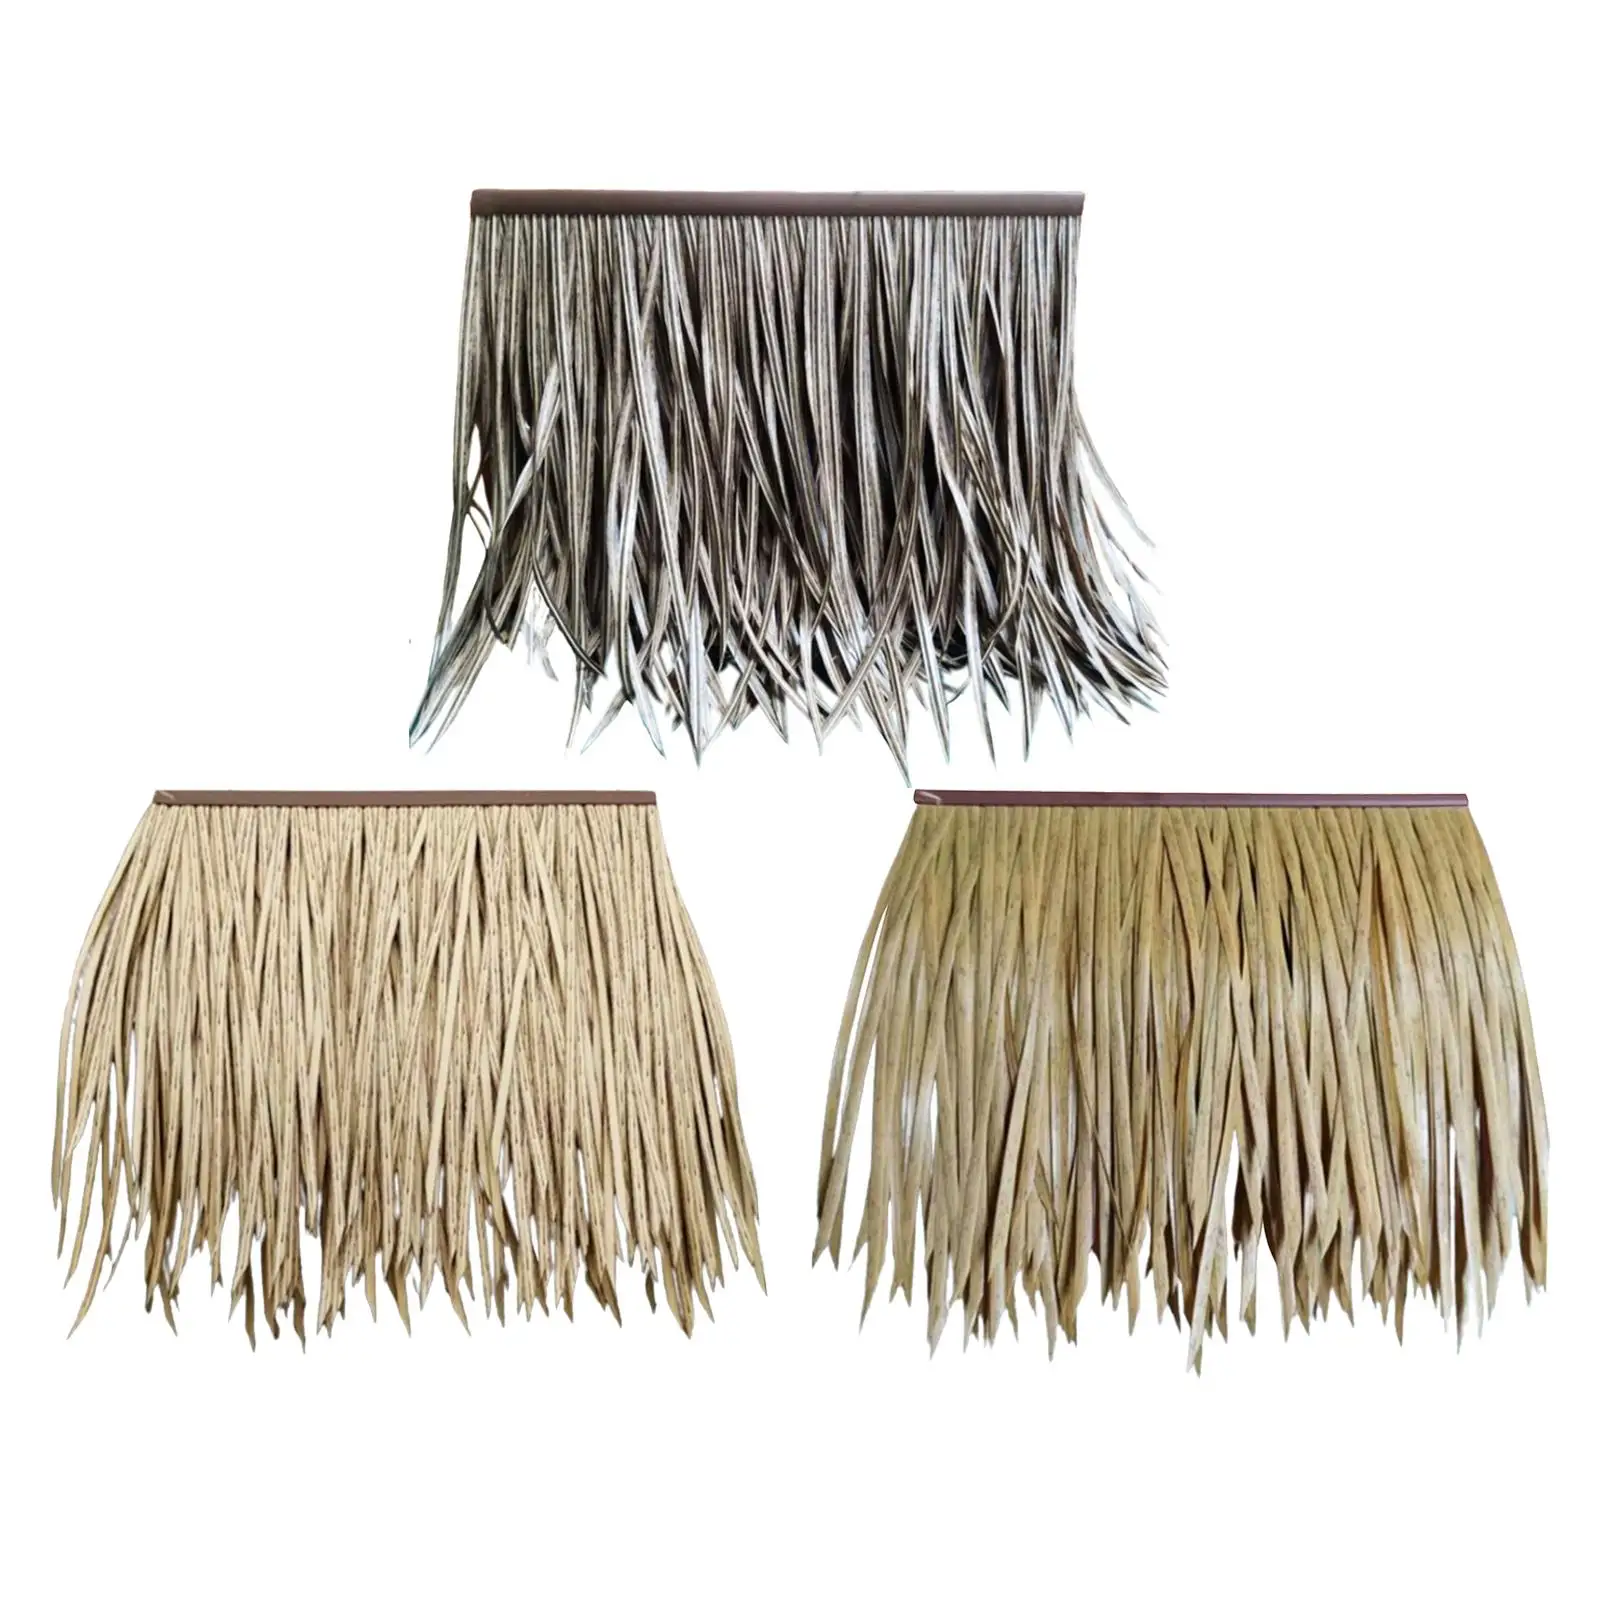 DIY Artificial Grass Thatch Roofing 50x50cm PETG Material for Indoor Outdoor Occasion Decorative Stylish Bar Hut Grass